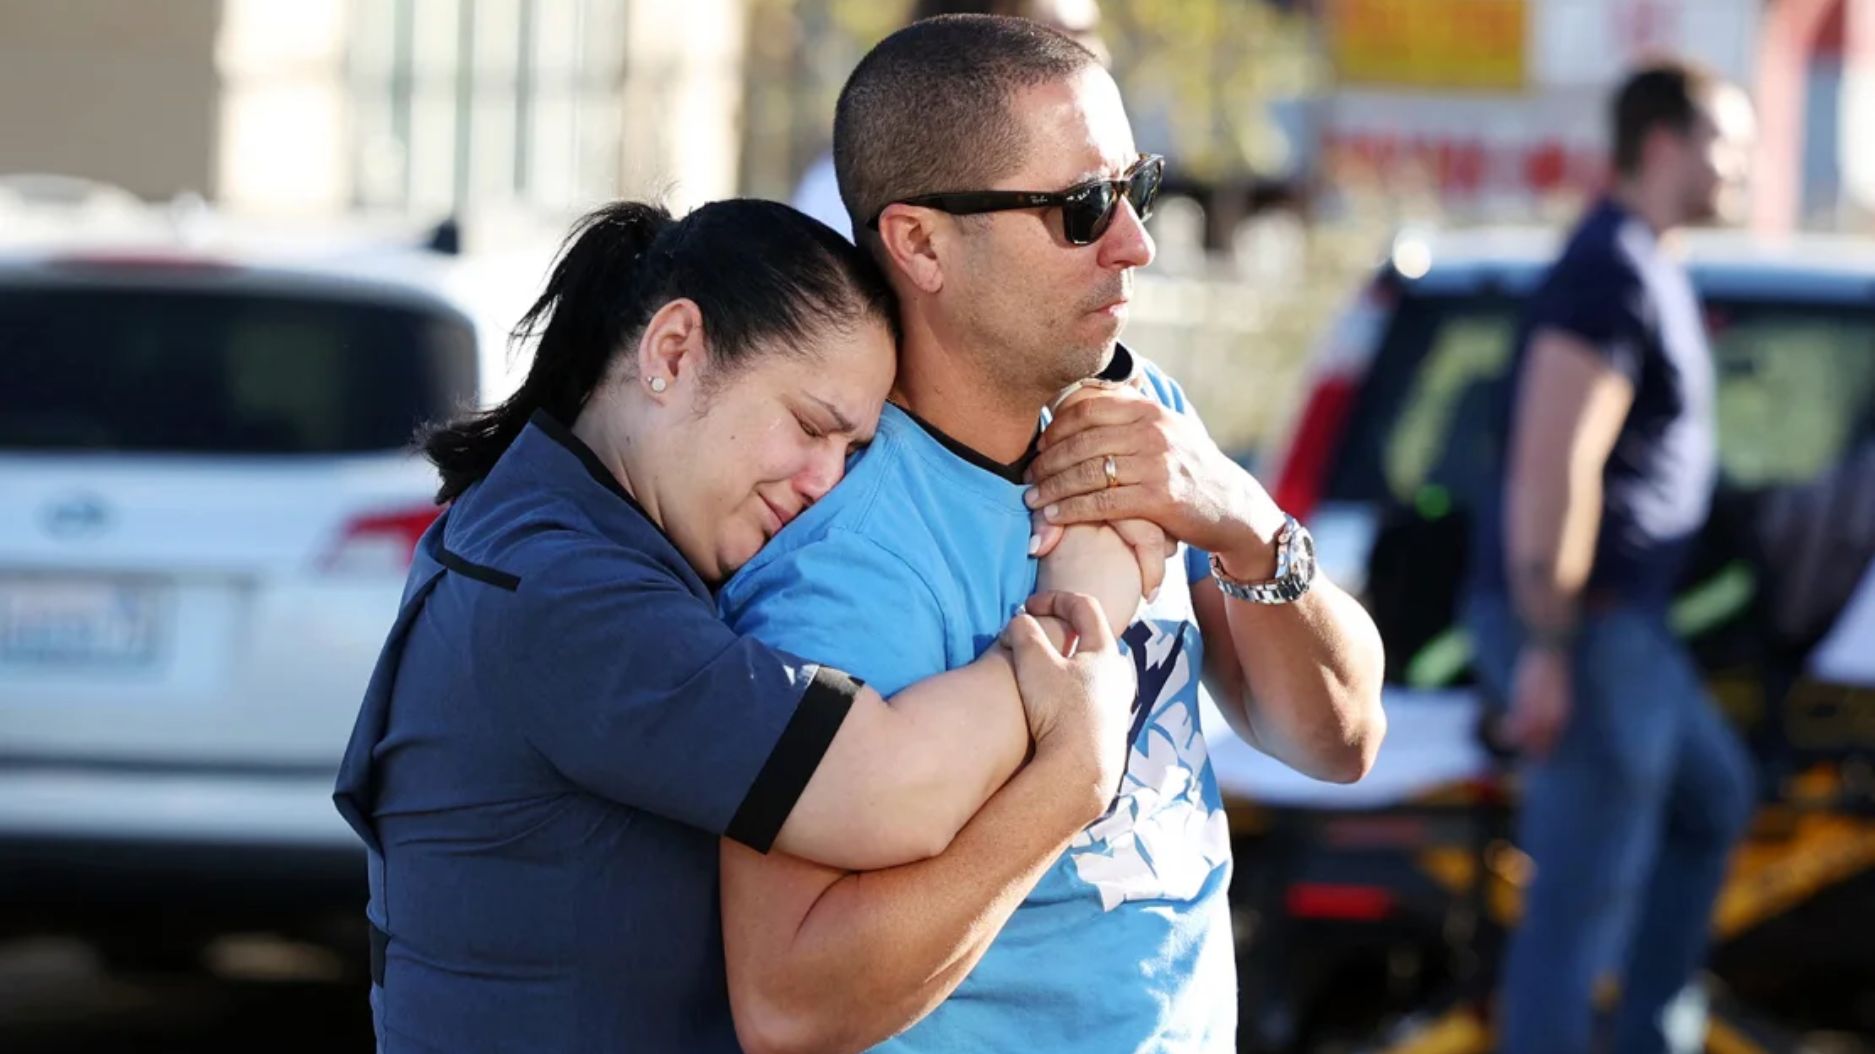 Parents Mabel Fontanilla and Raul Villalonga hug after the shooting on the University of Nevada campus in Las Vegas this Wednesday.  (Credit: Rhonda Churchill/AFP/Getty Images)